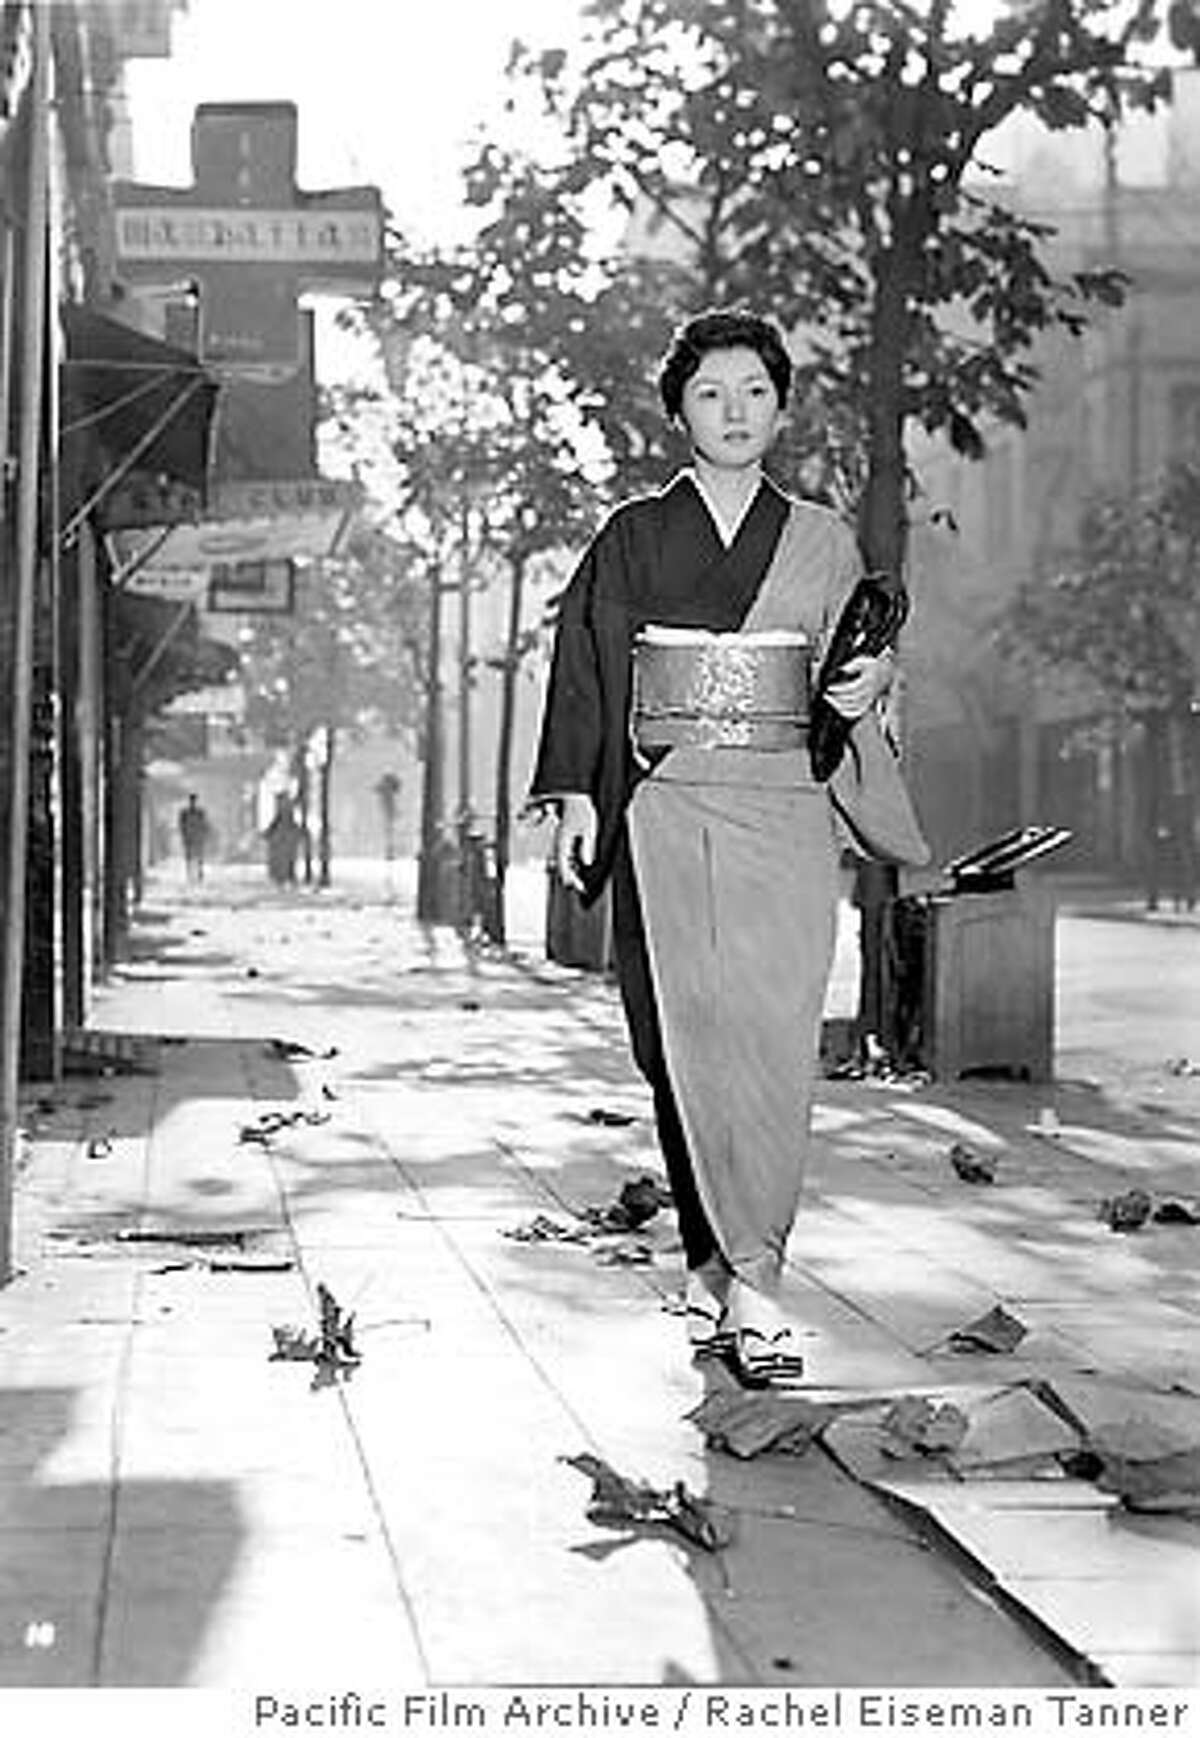 Still from the movie, "When A Woman Ascends the Stairs" pictured is Hideko Takamine. Credit: Courtesy of Rachel Eiseman Tanner/University of California, Berkeley Art Museum and Pacific Film Archive Pacific Film Archive / Rachel Eiseman Tanner